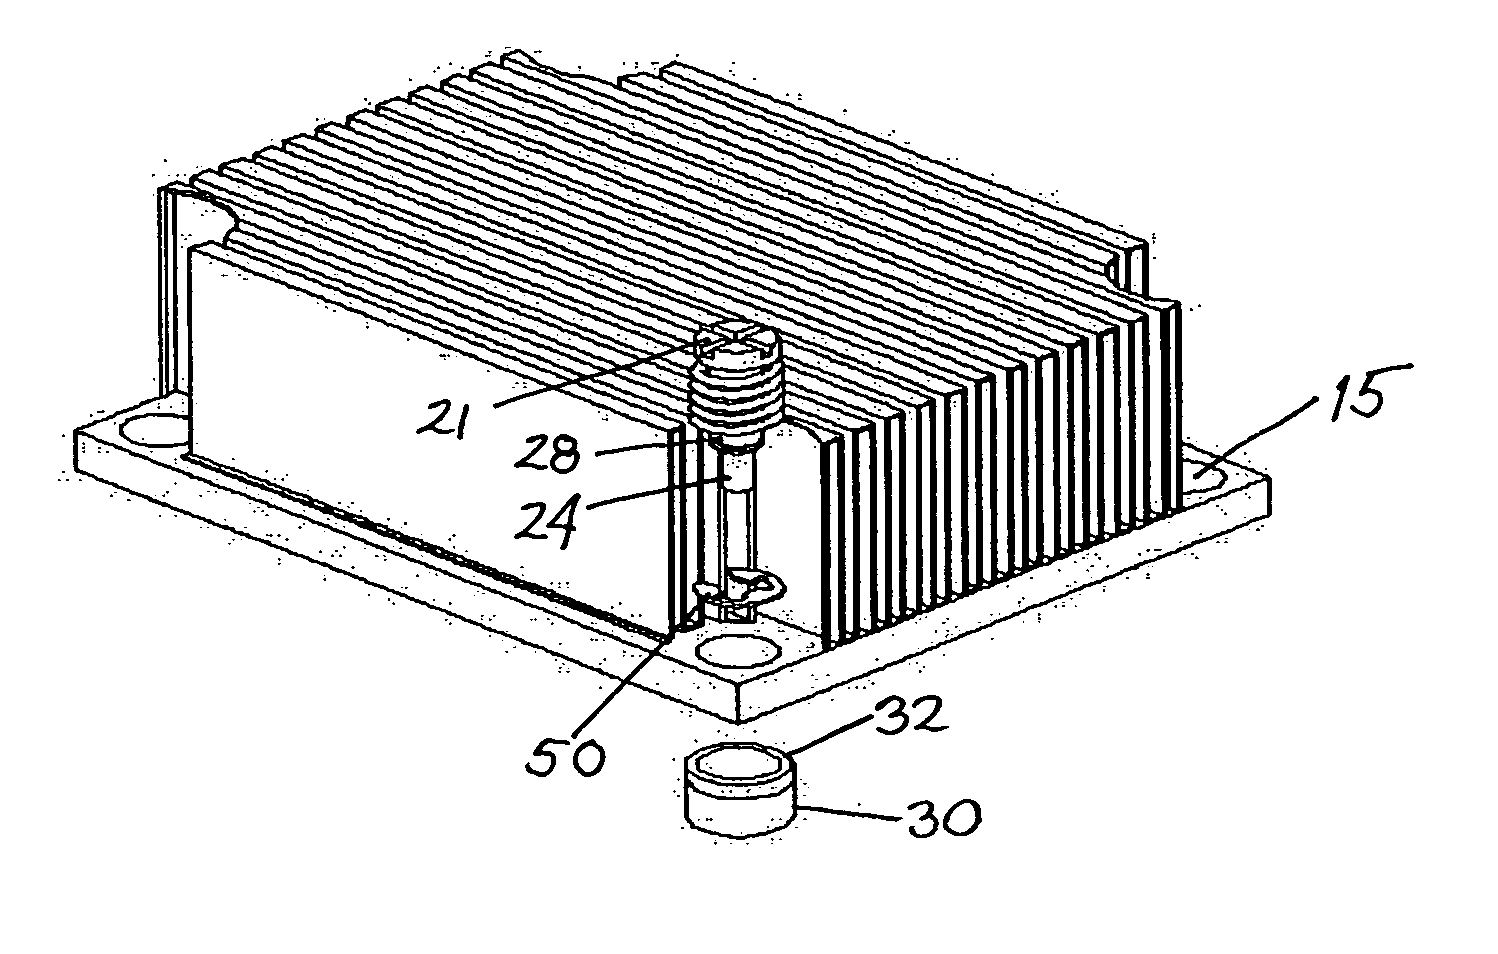 Heat sink assembly and connecting device